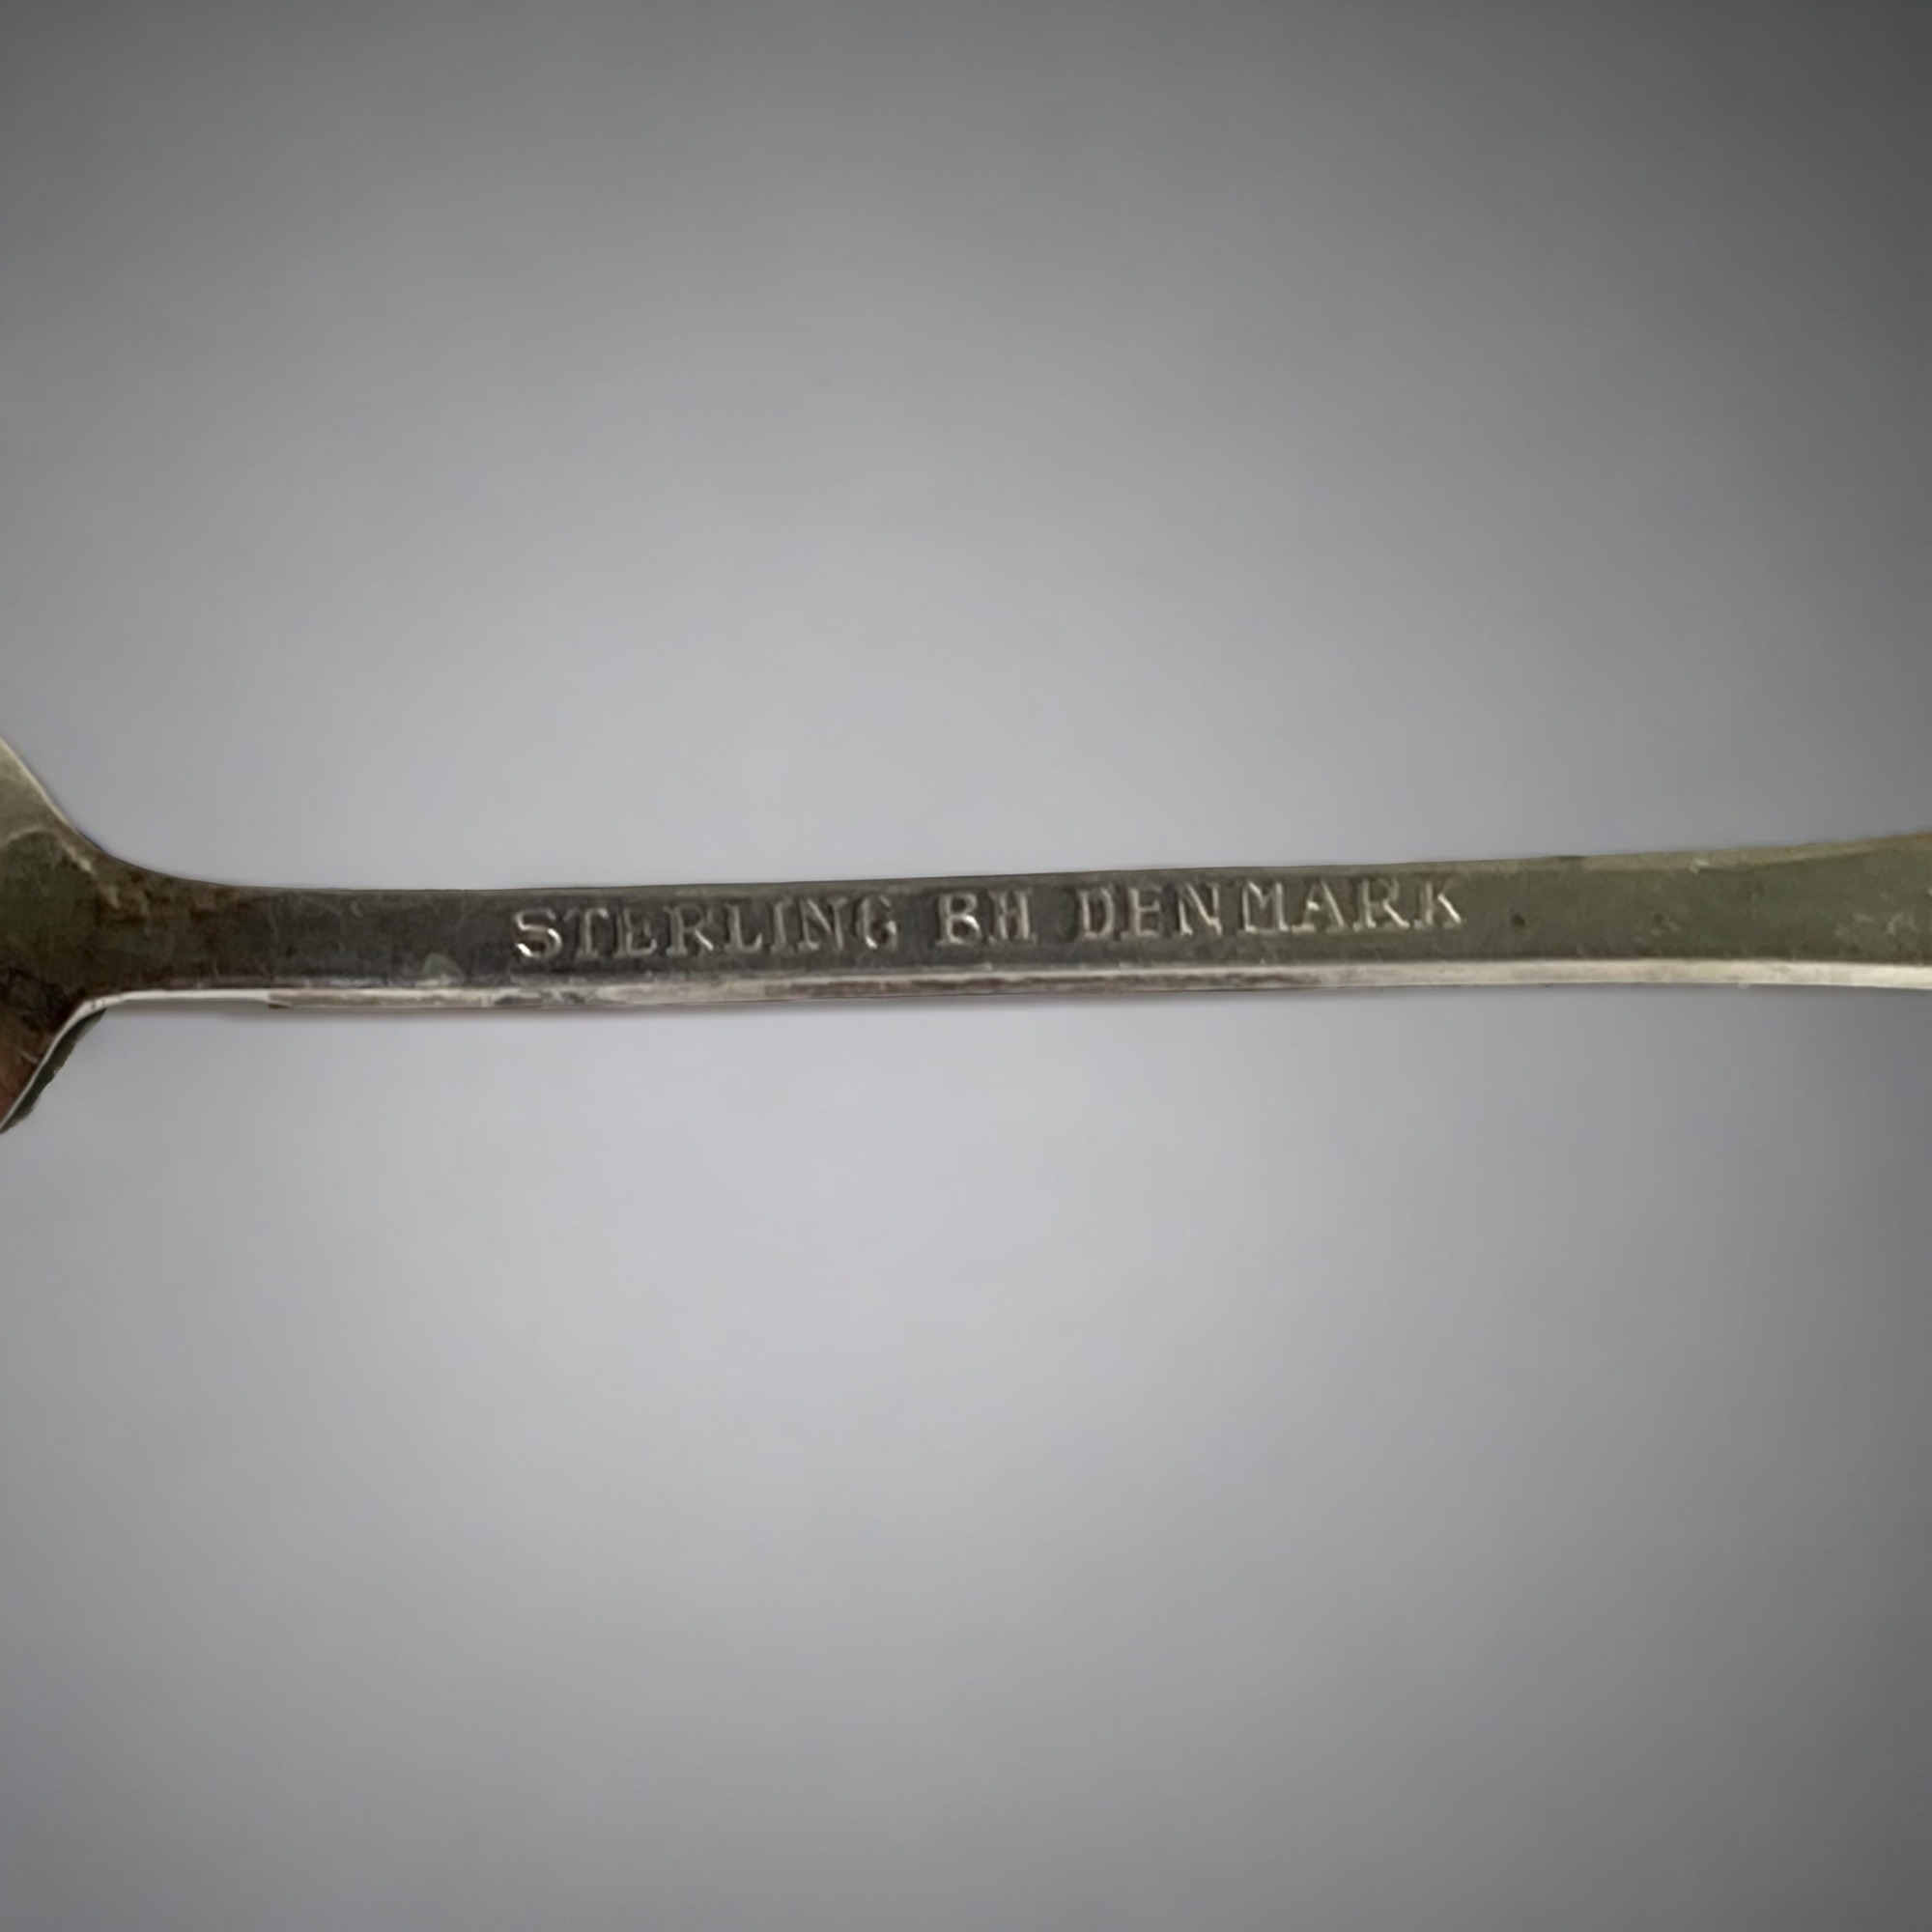 A STERLING SILVER BERNHARD HERTZ, DENMARK CROWN TEASPOON, TOGETHER WITH STERLING SILVER CADDY SPOON. - Image 5 of 5